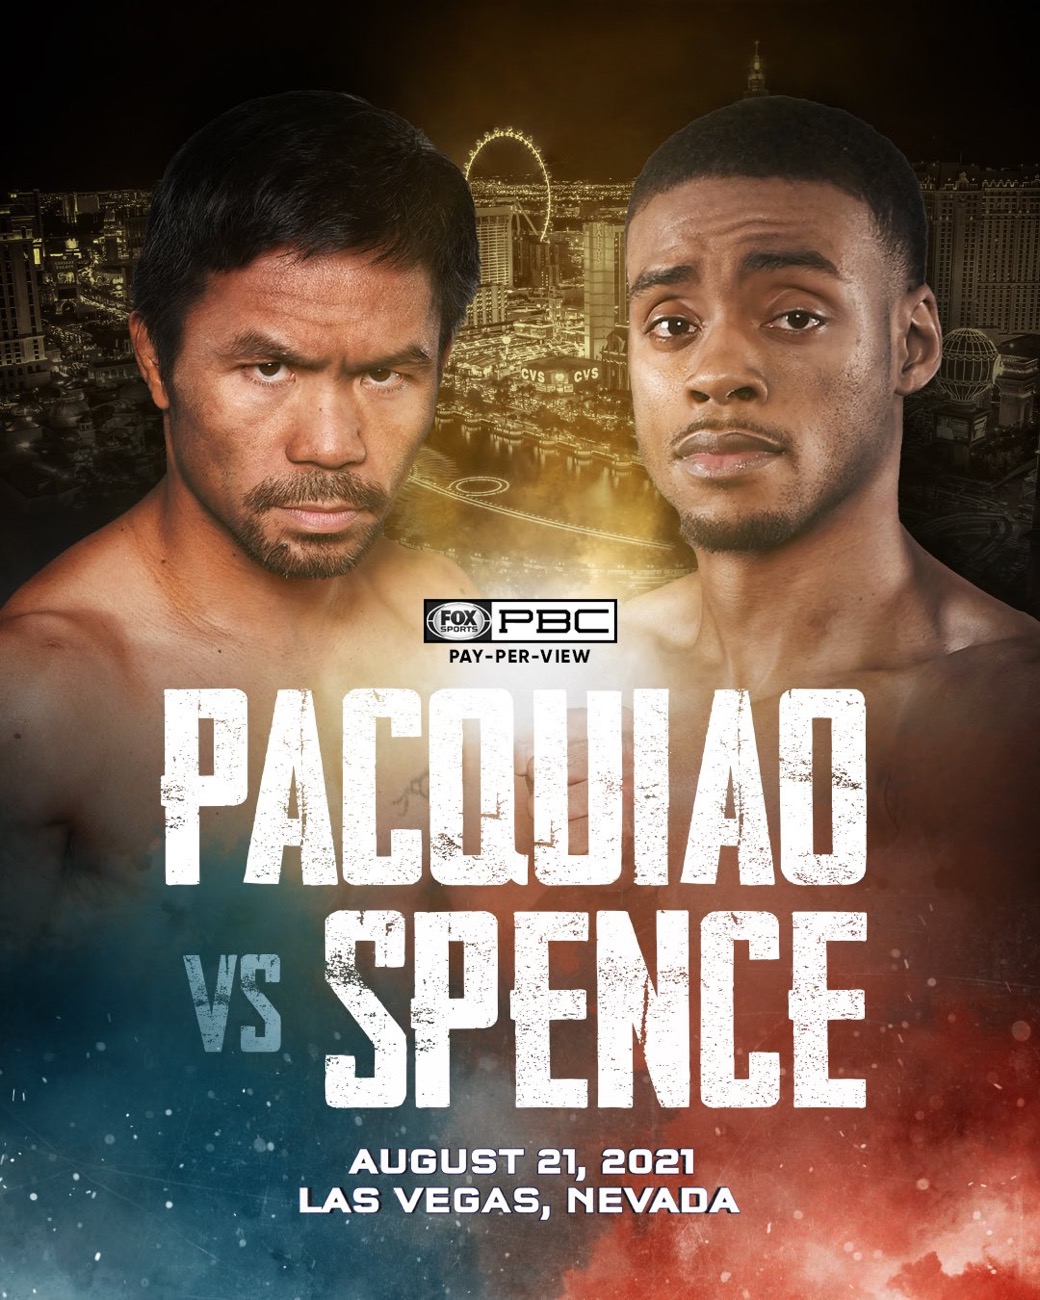 Manny Pacquiao vs. Errol Spence - Done deal for Aug.21 in Las Vegas